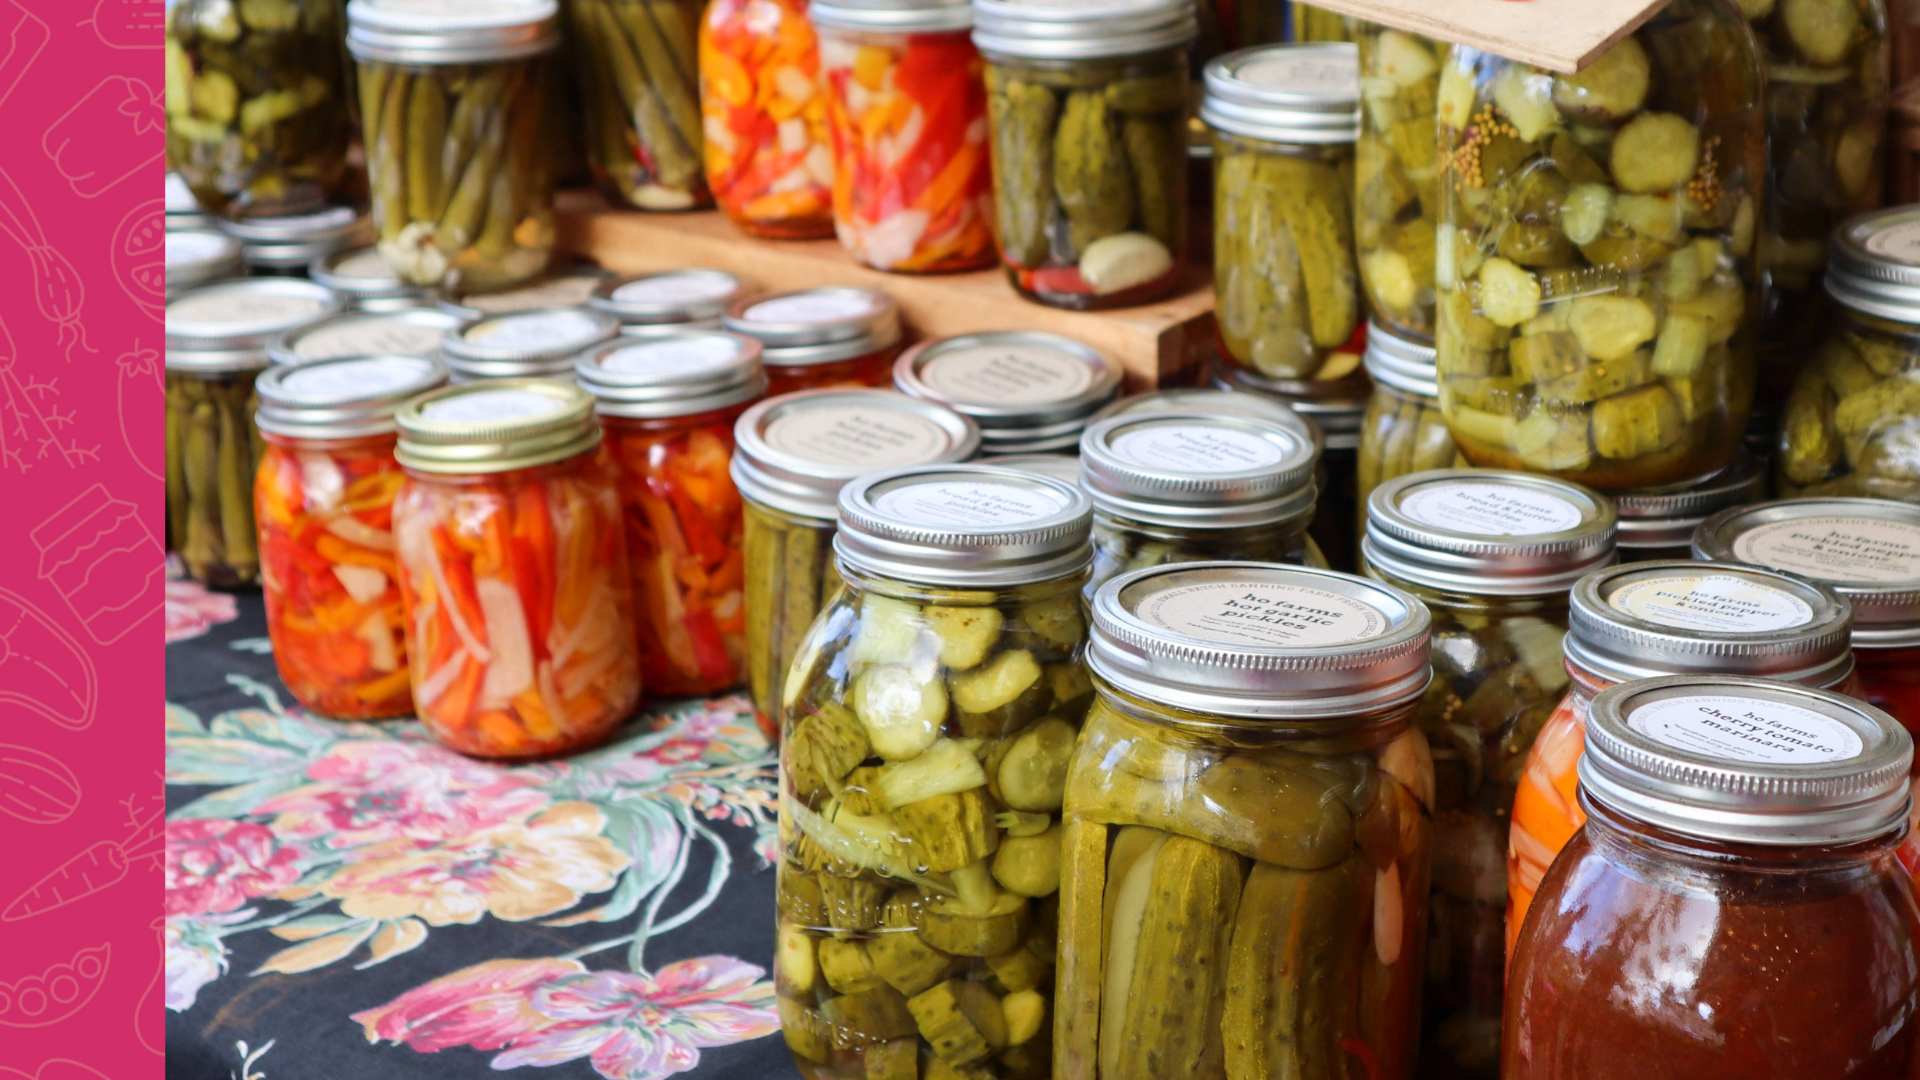 Pickles and ferments